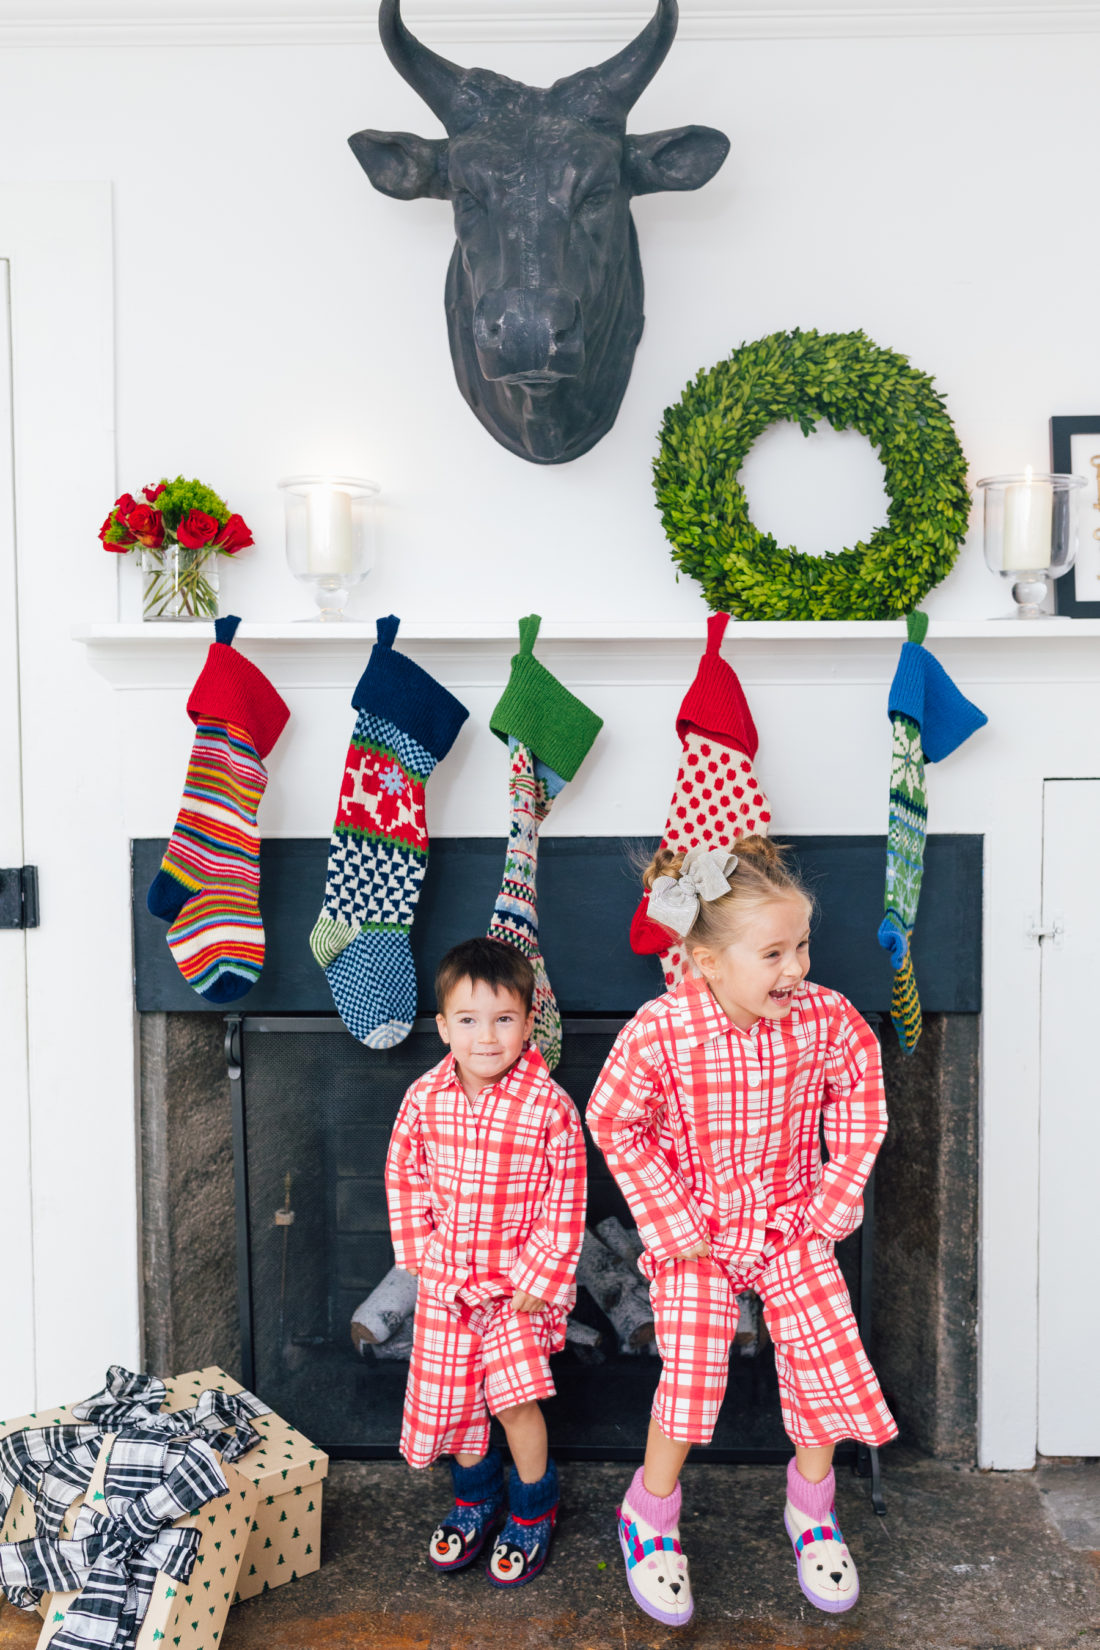 Marlowe and Major Martino show off their matching pajamas in front of their Christmas stockings, all from Garnet Hill